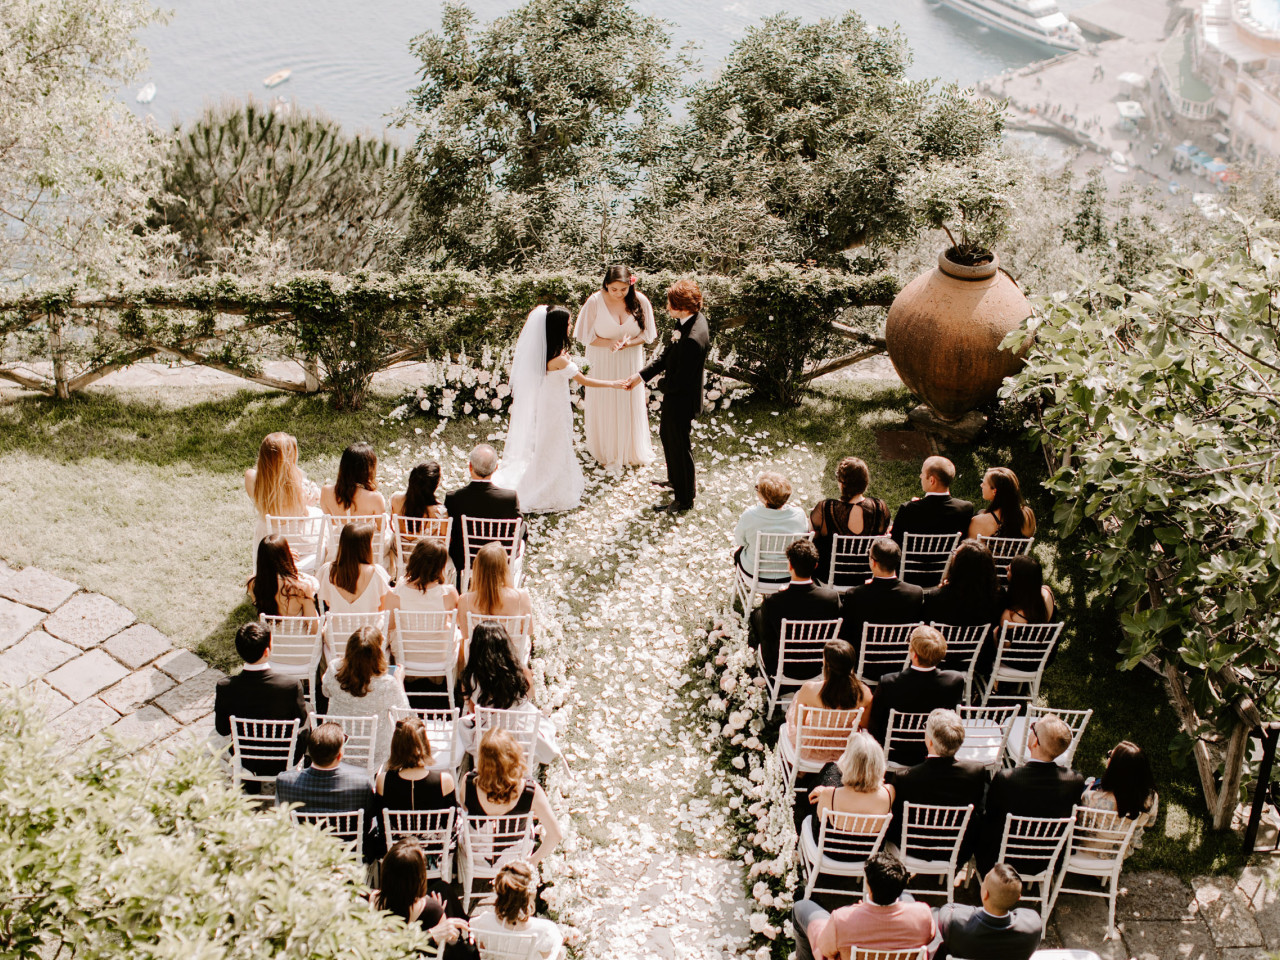 Getting married on the Amalfi Coast: the best locations